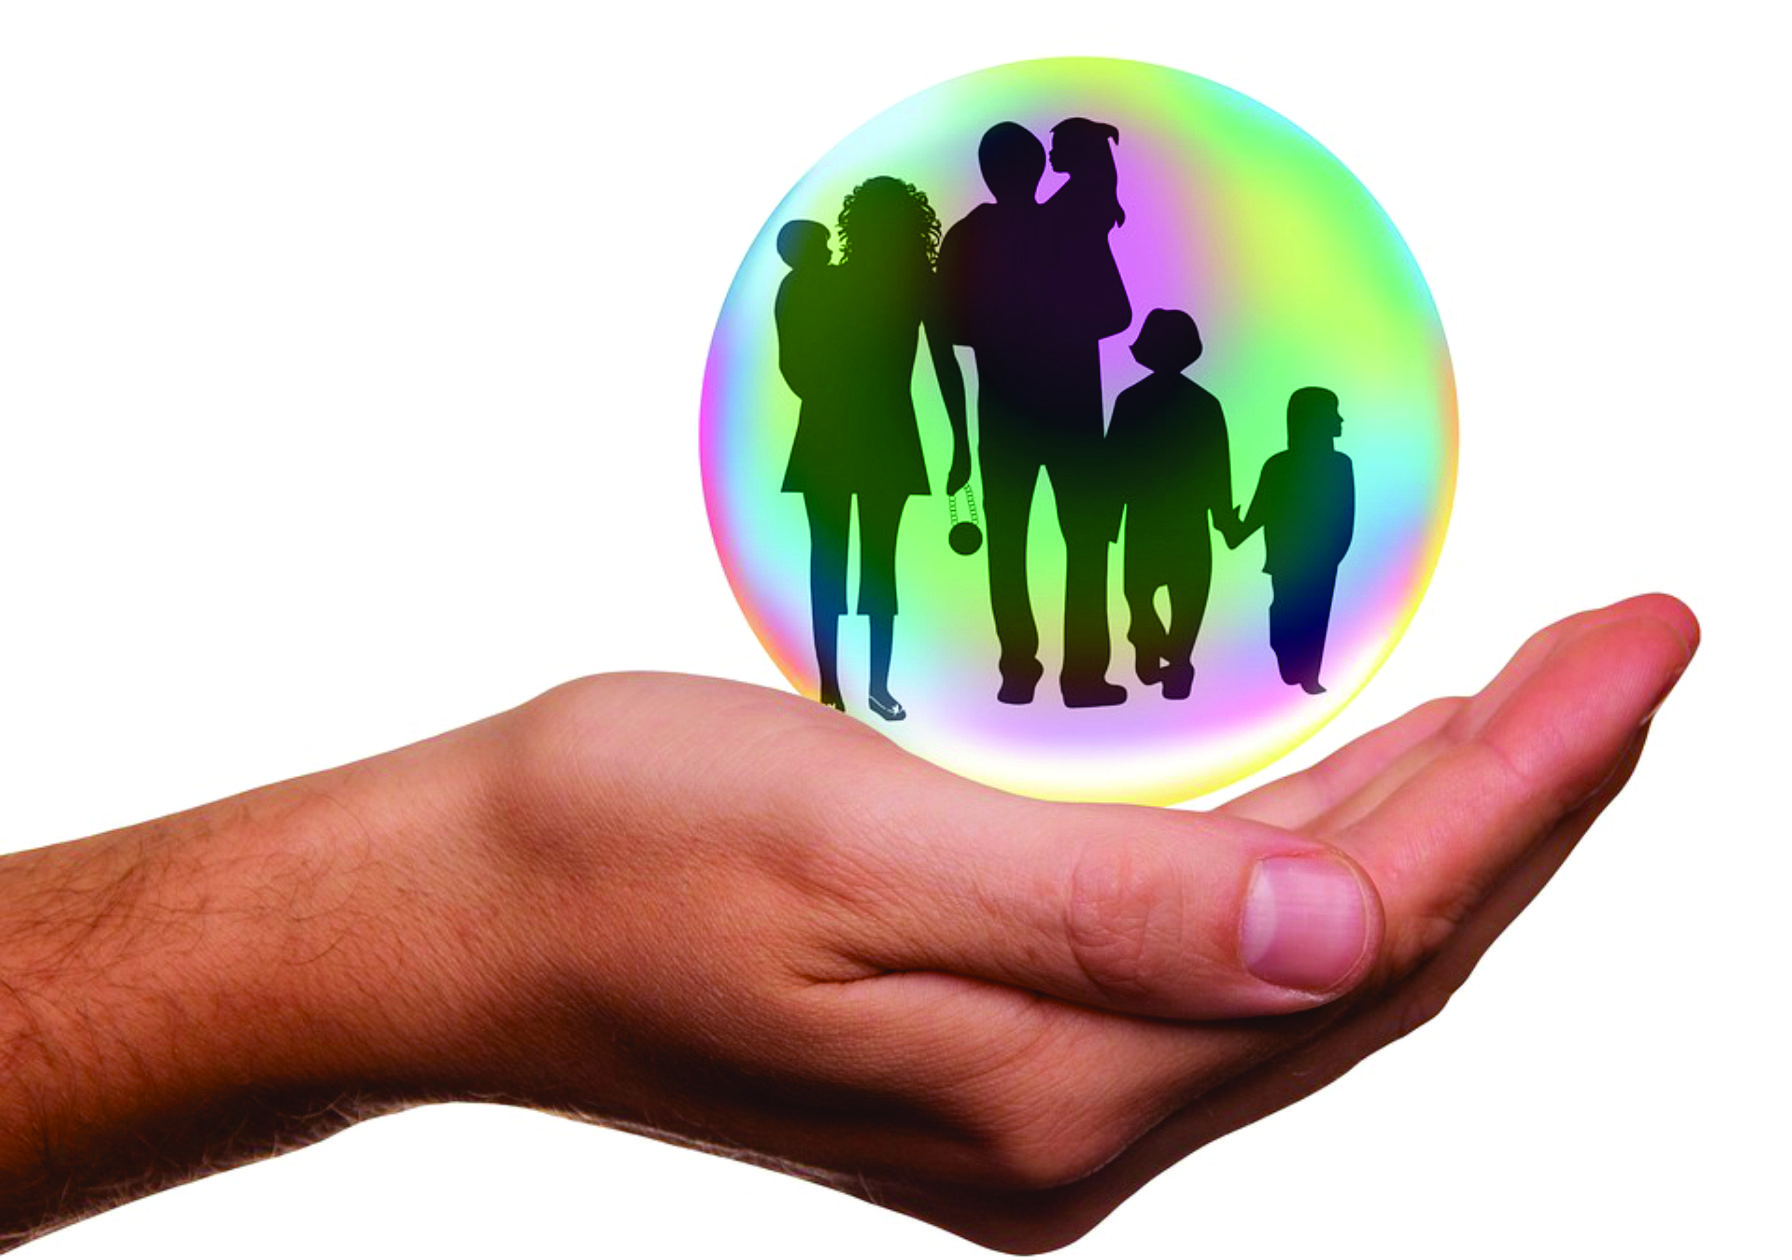 With an increase in the ITCMD, life insurance is an alternative for planning inheritance